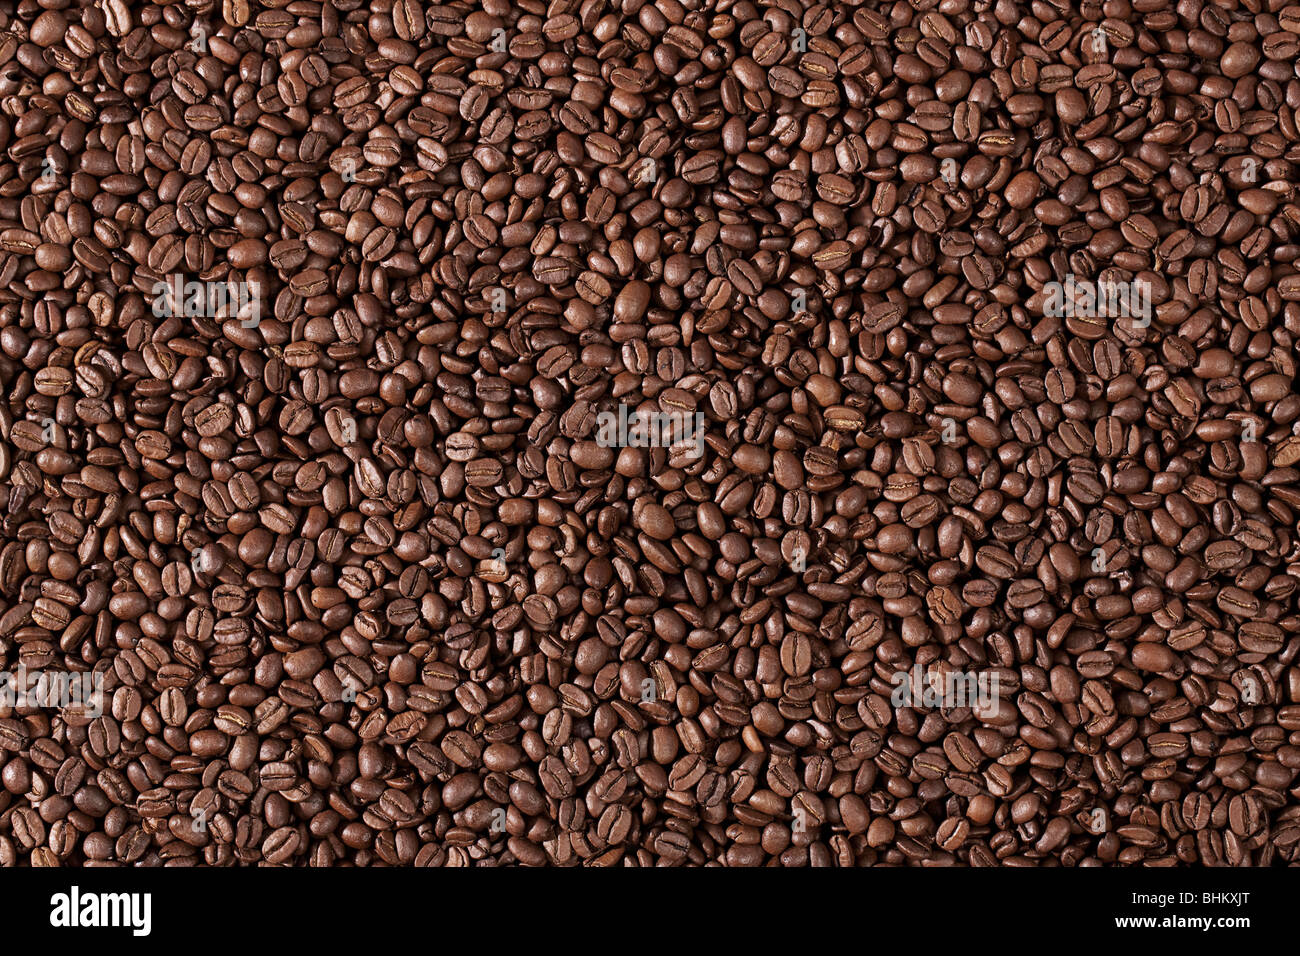 Background image of many coffee beans filling the picture Stock Photo